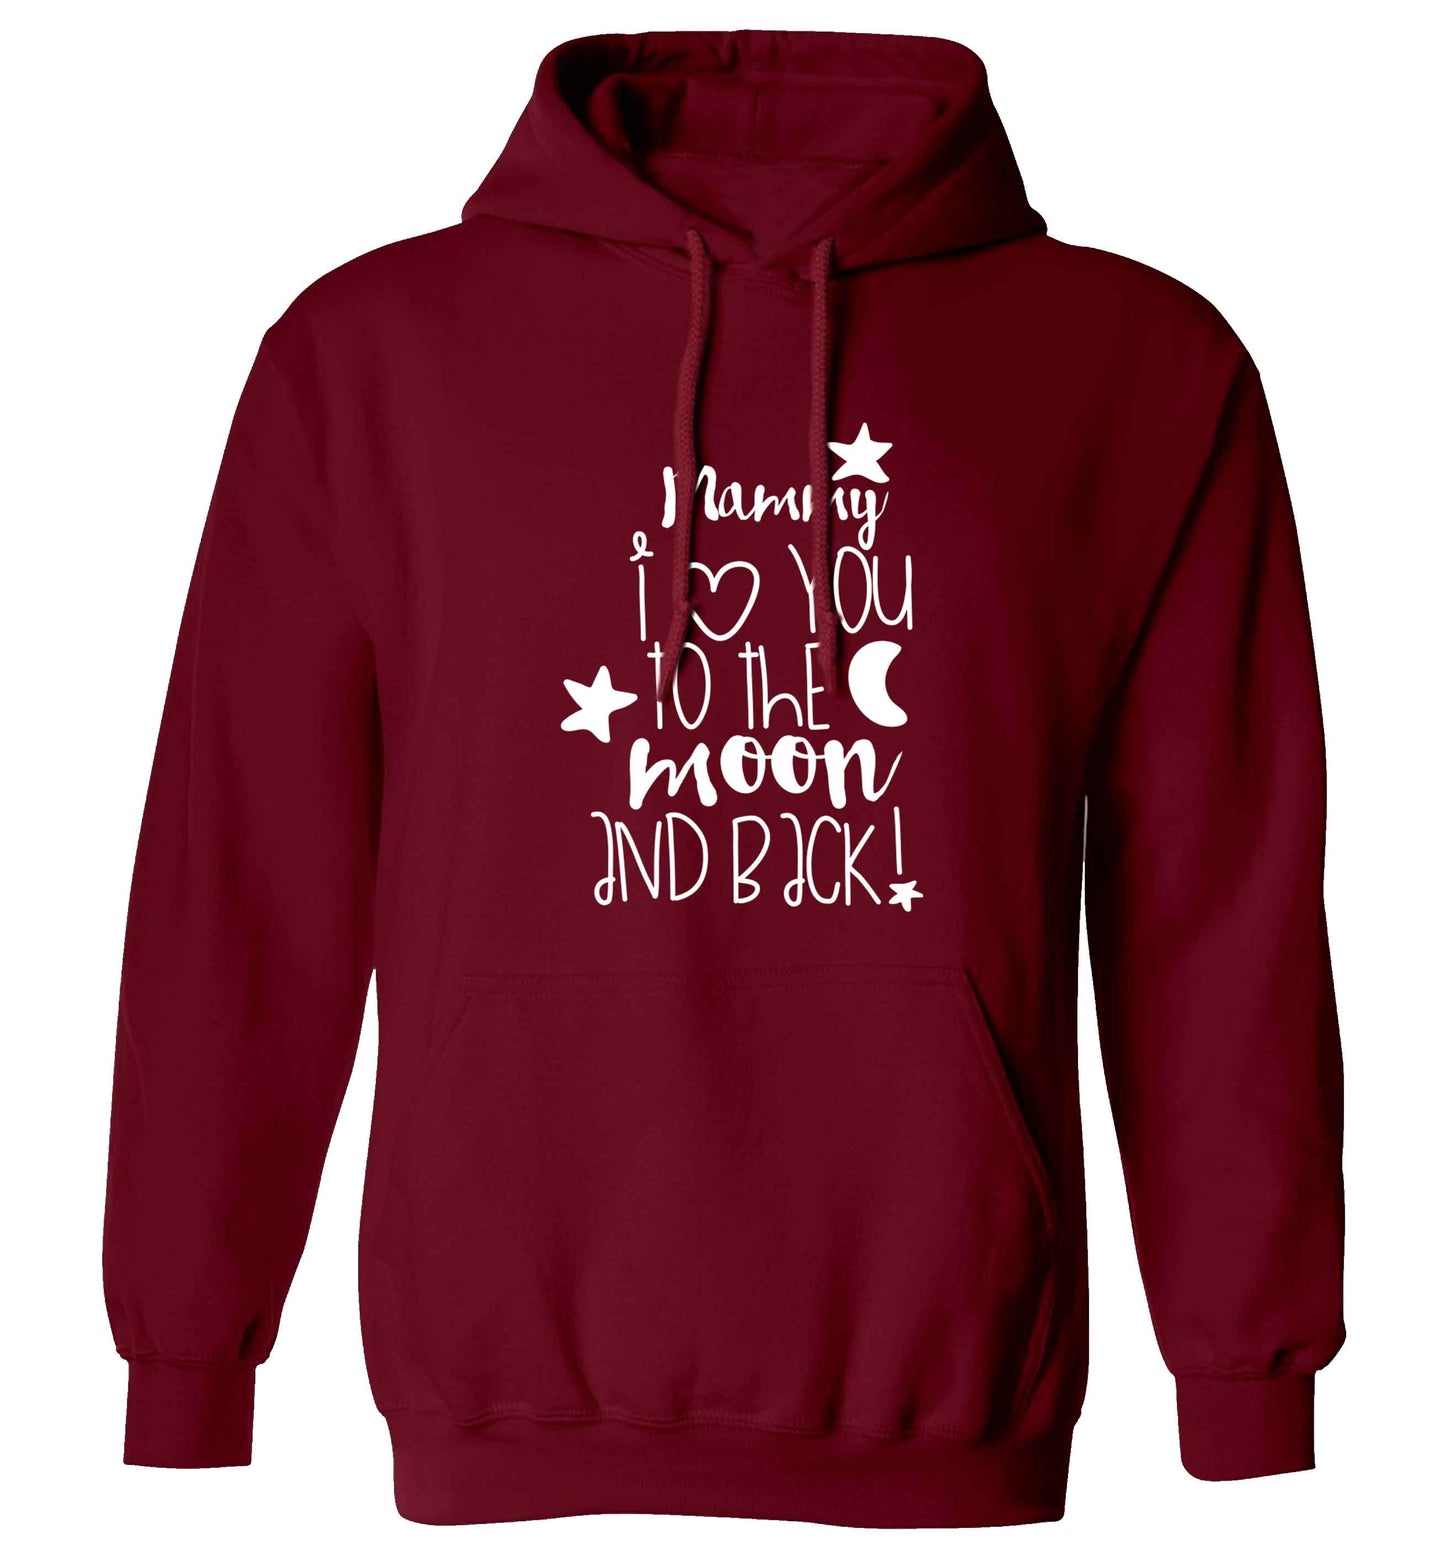 Mammy I love you to the moon and back adults unisex maroon hoodie 2XL